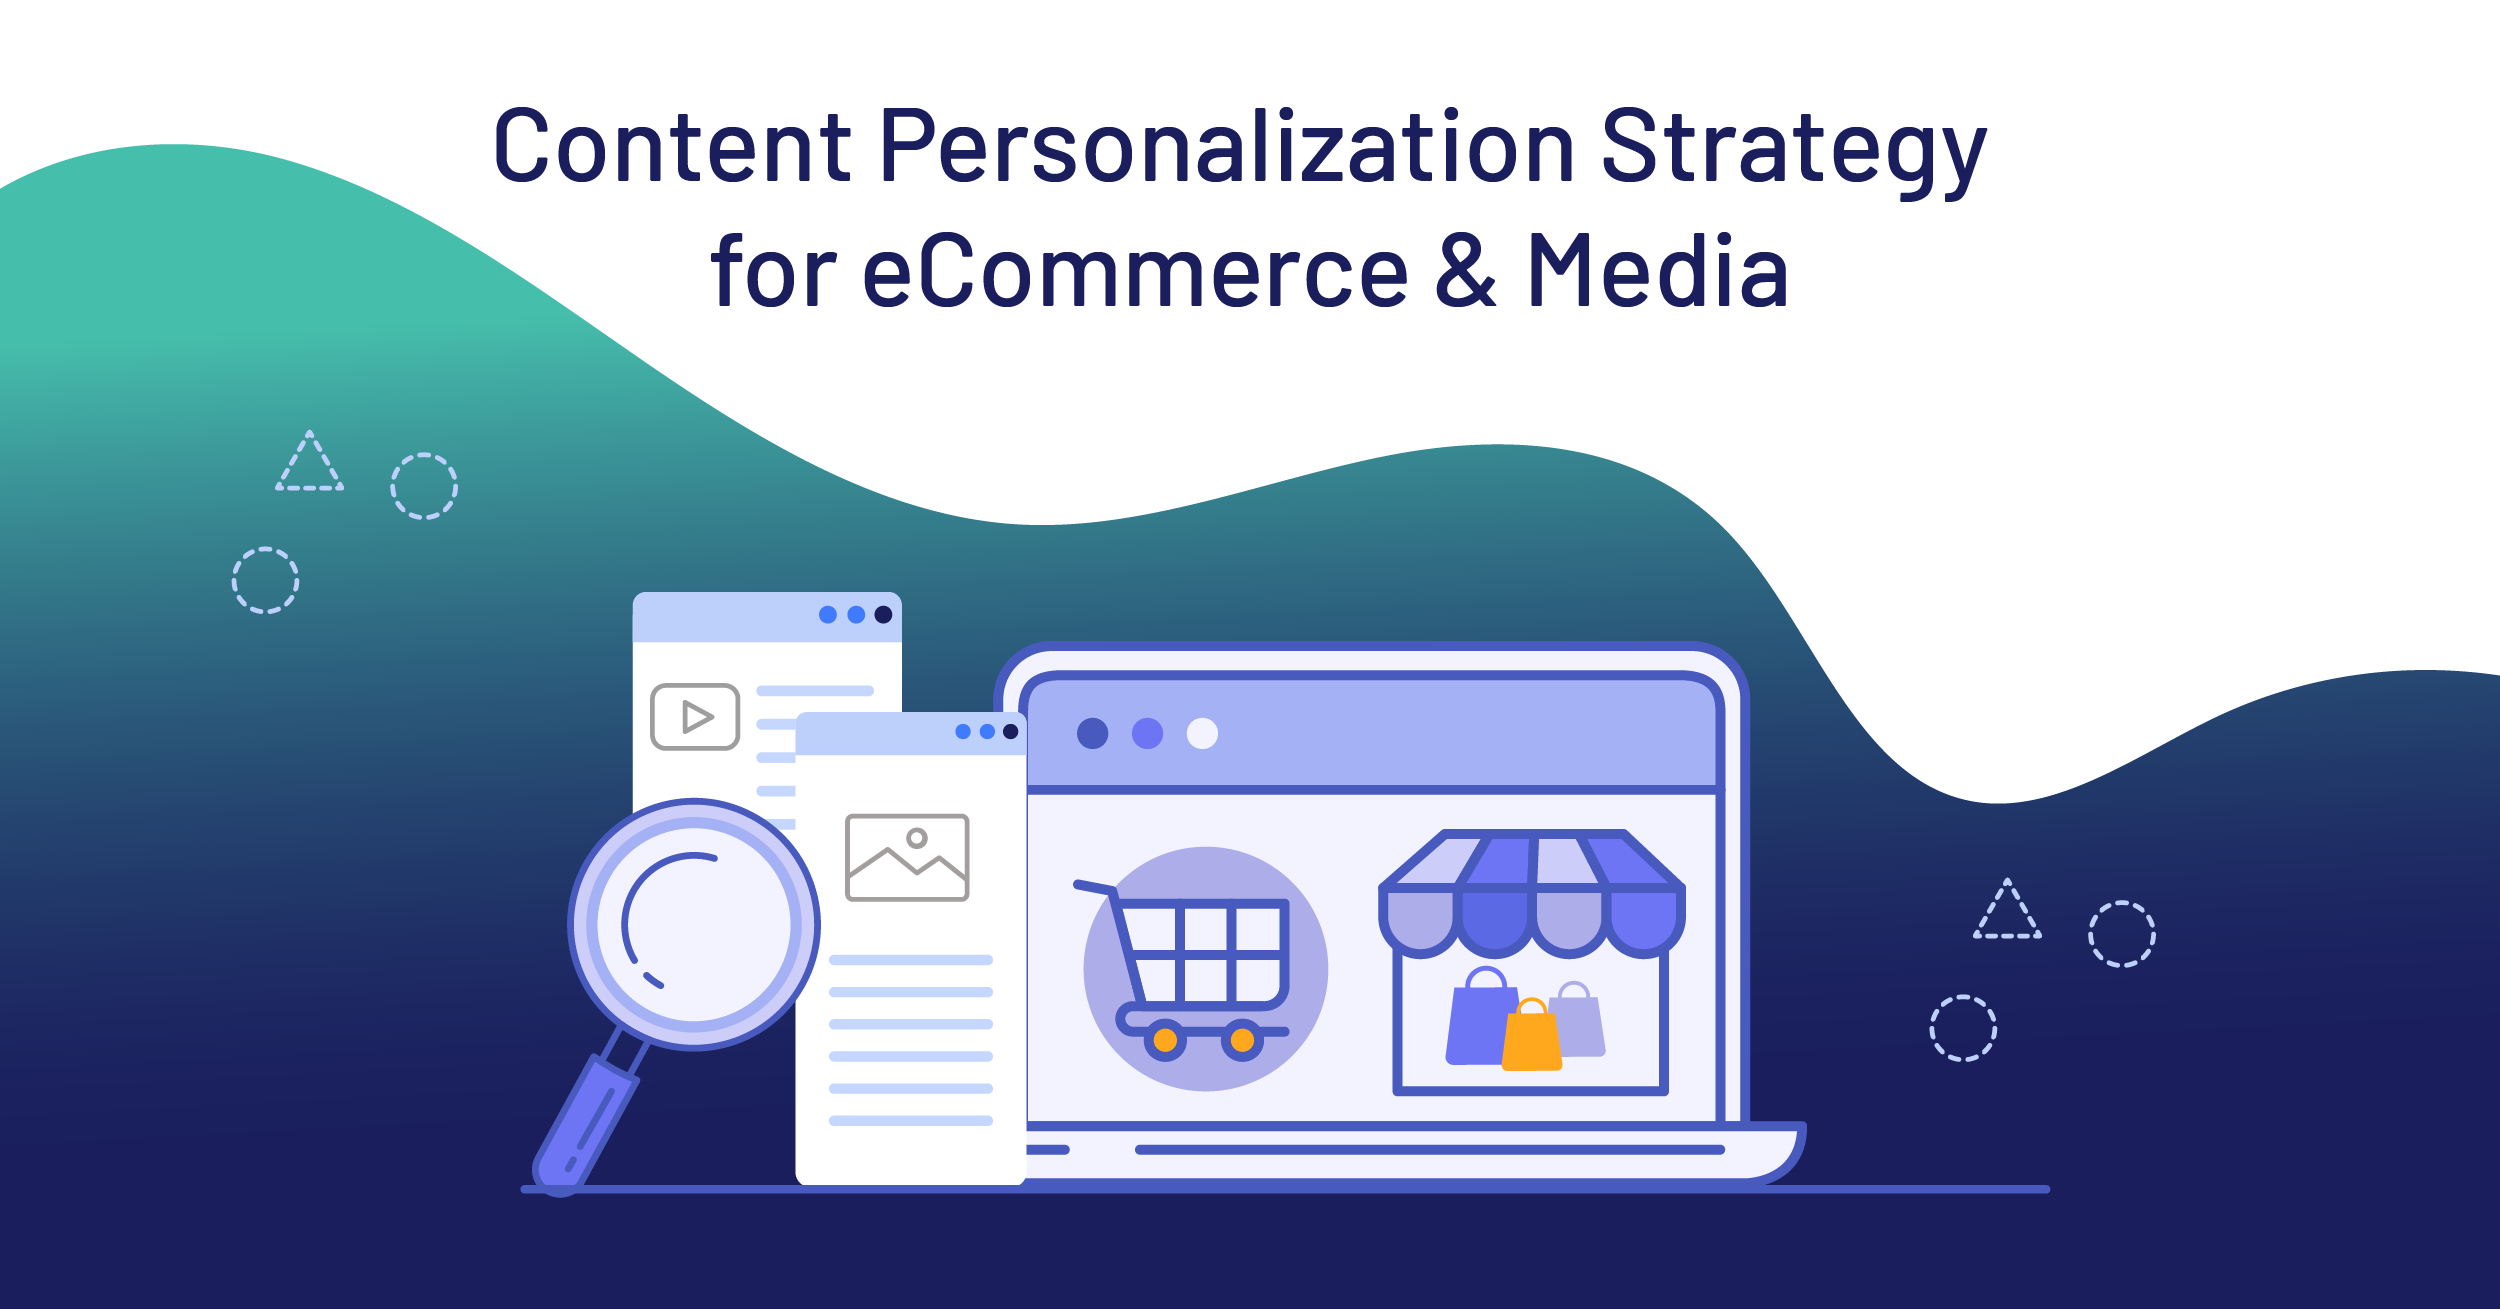 Content Personalization Strategy